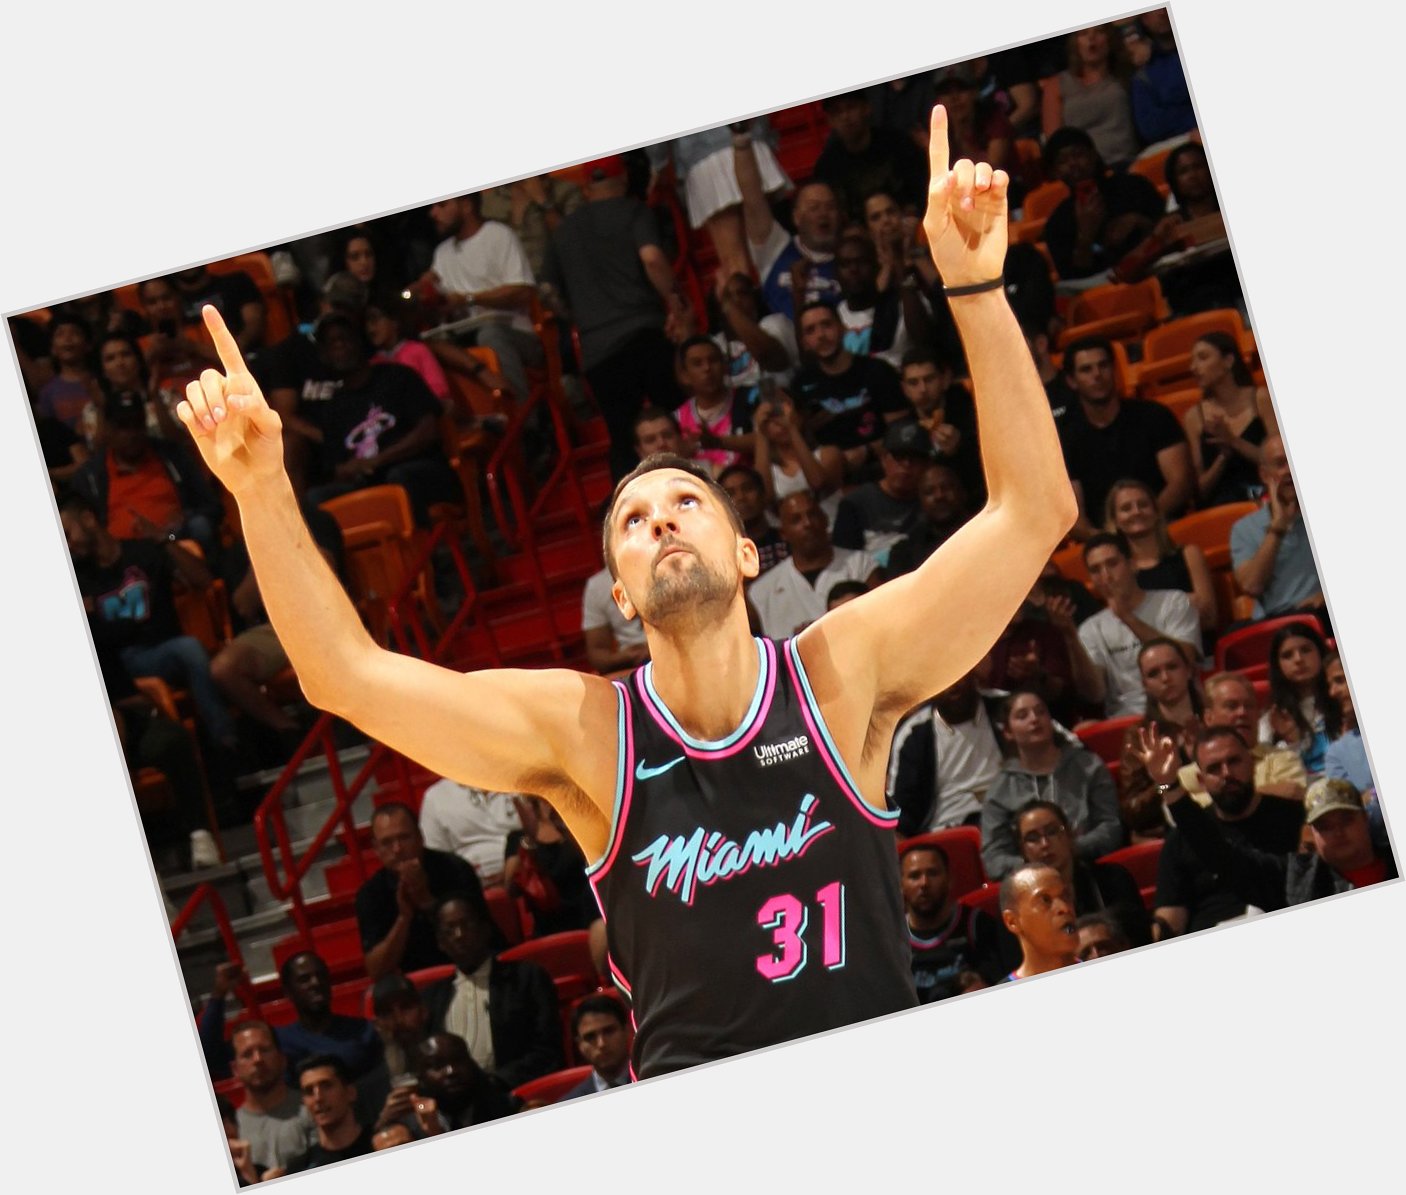 Join us in wishing Ryan Anderson of the MiamiHEAT a HAPPY 31st BIRTHDAY!  